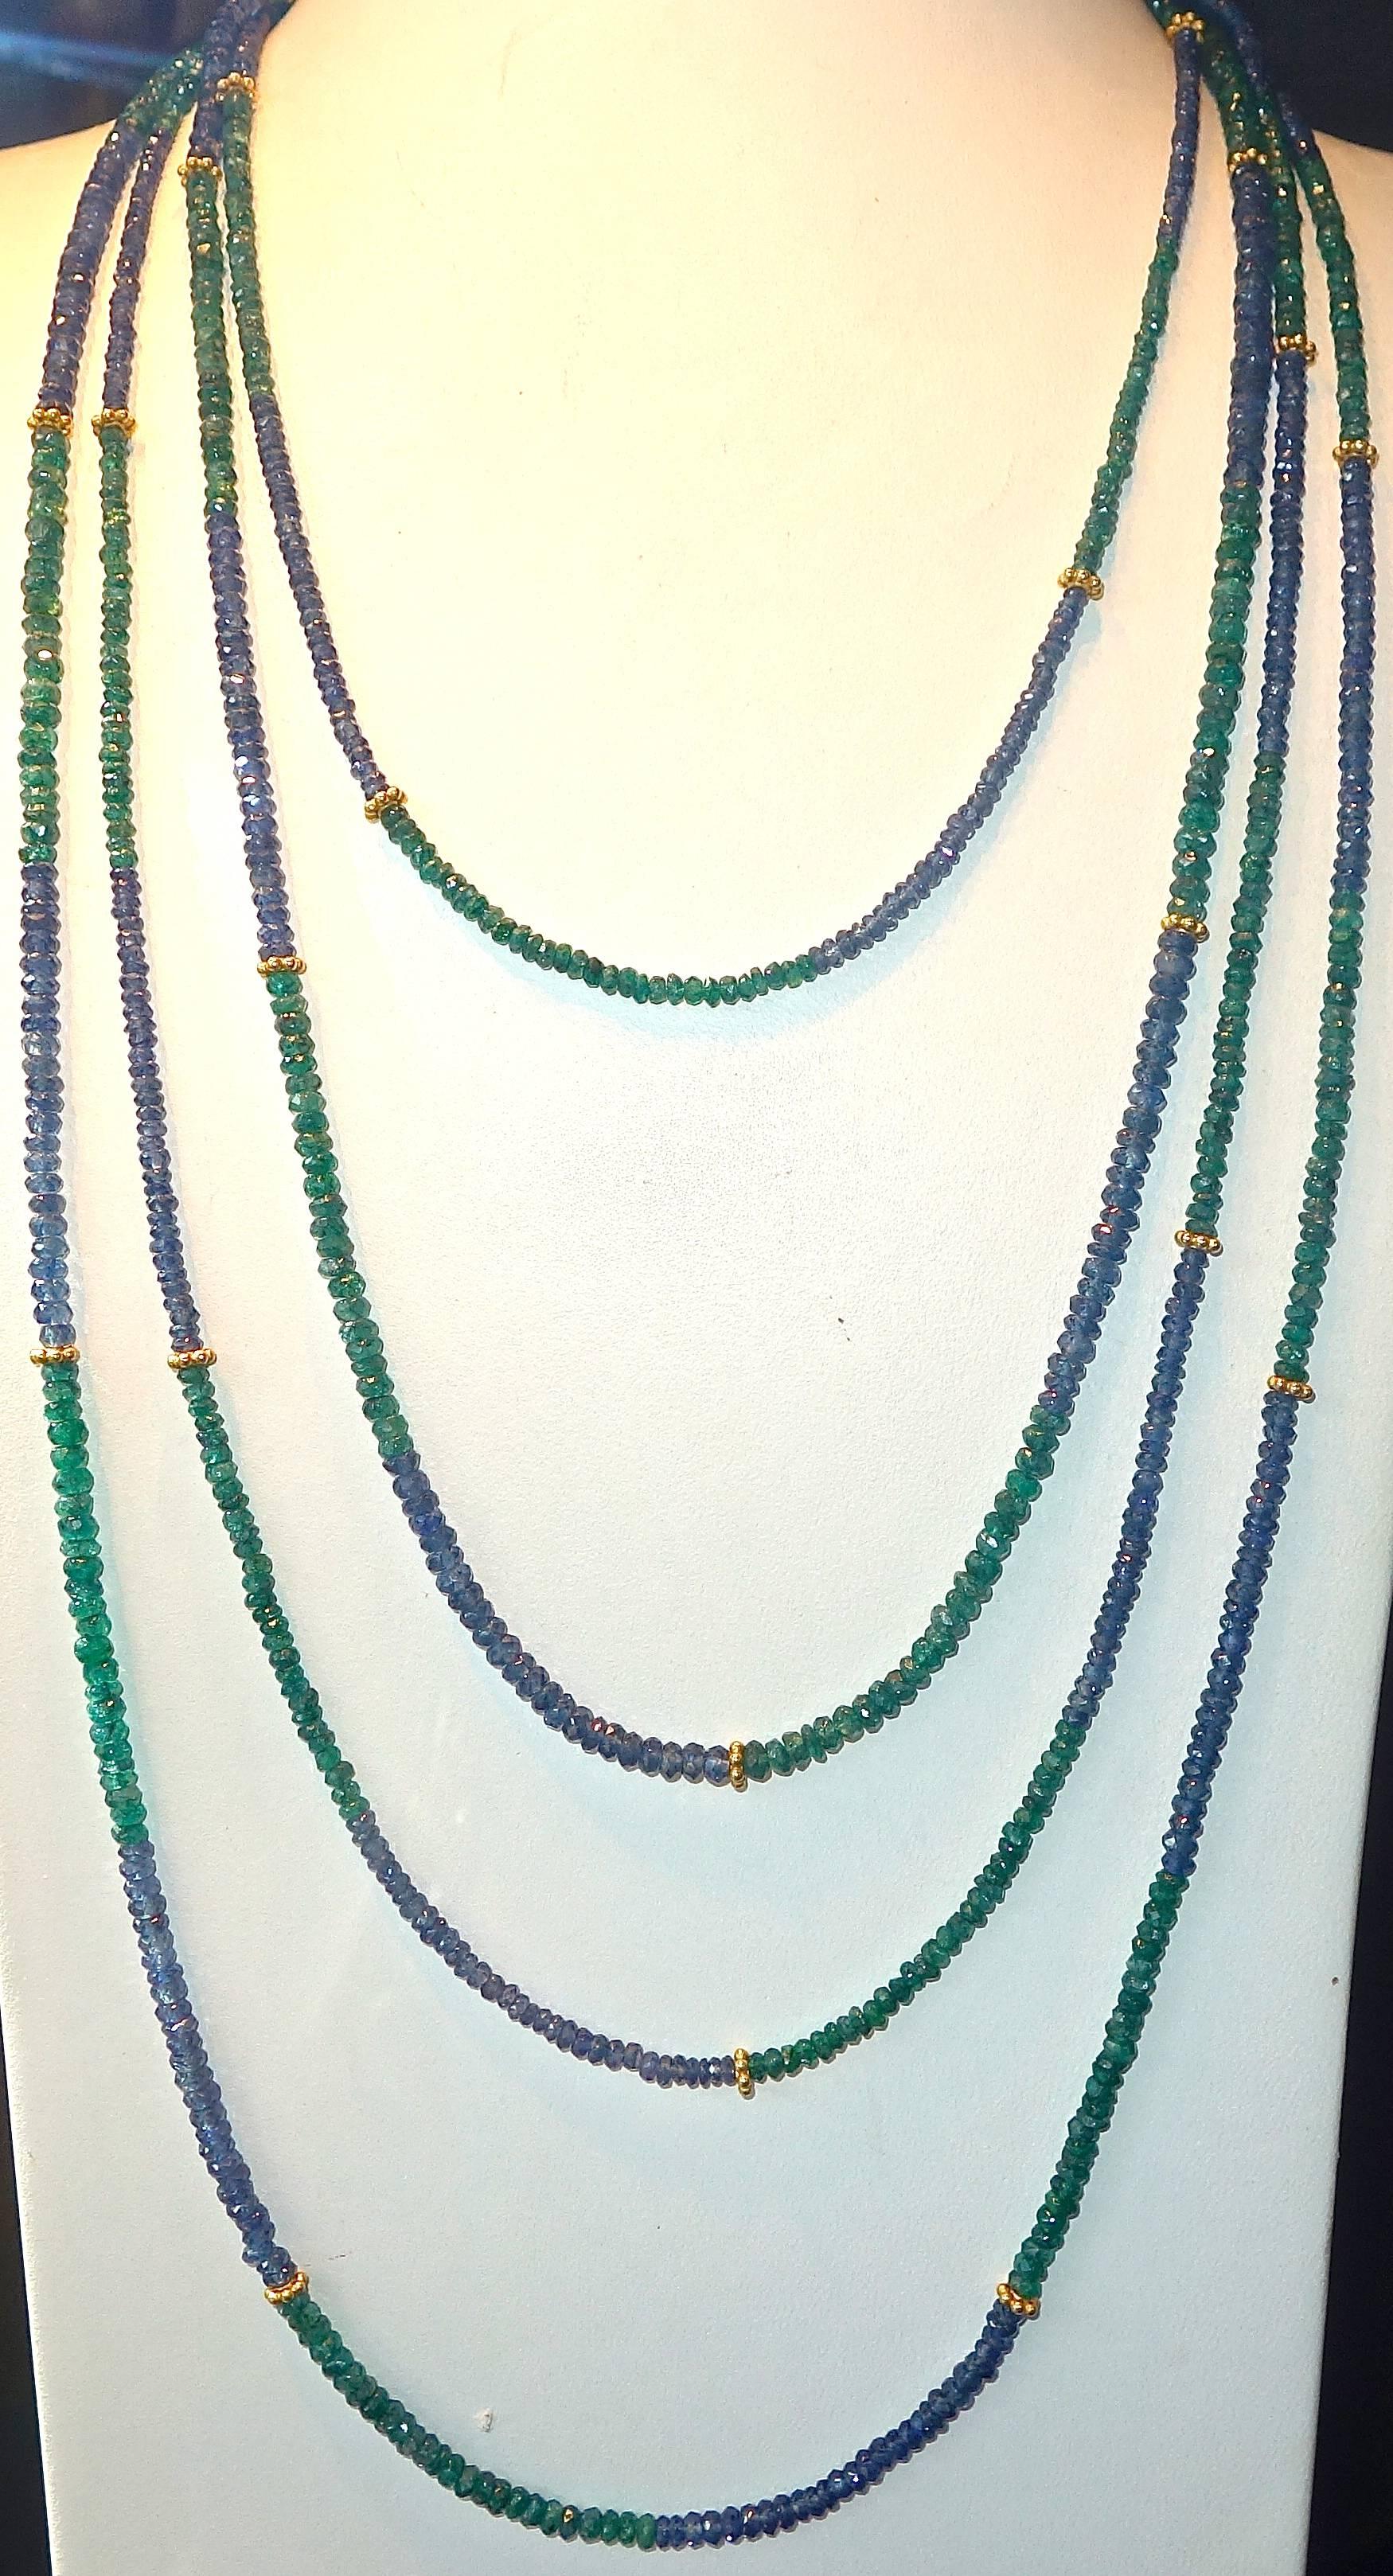 Fine bright facetted sapphire and emerald beads are interspersed with floral motif 18K roundels. This necklace is 108 inches long and thus can be worn several different ways double over and tripled and quadrupled.  The 27 18K gold roundels create a